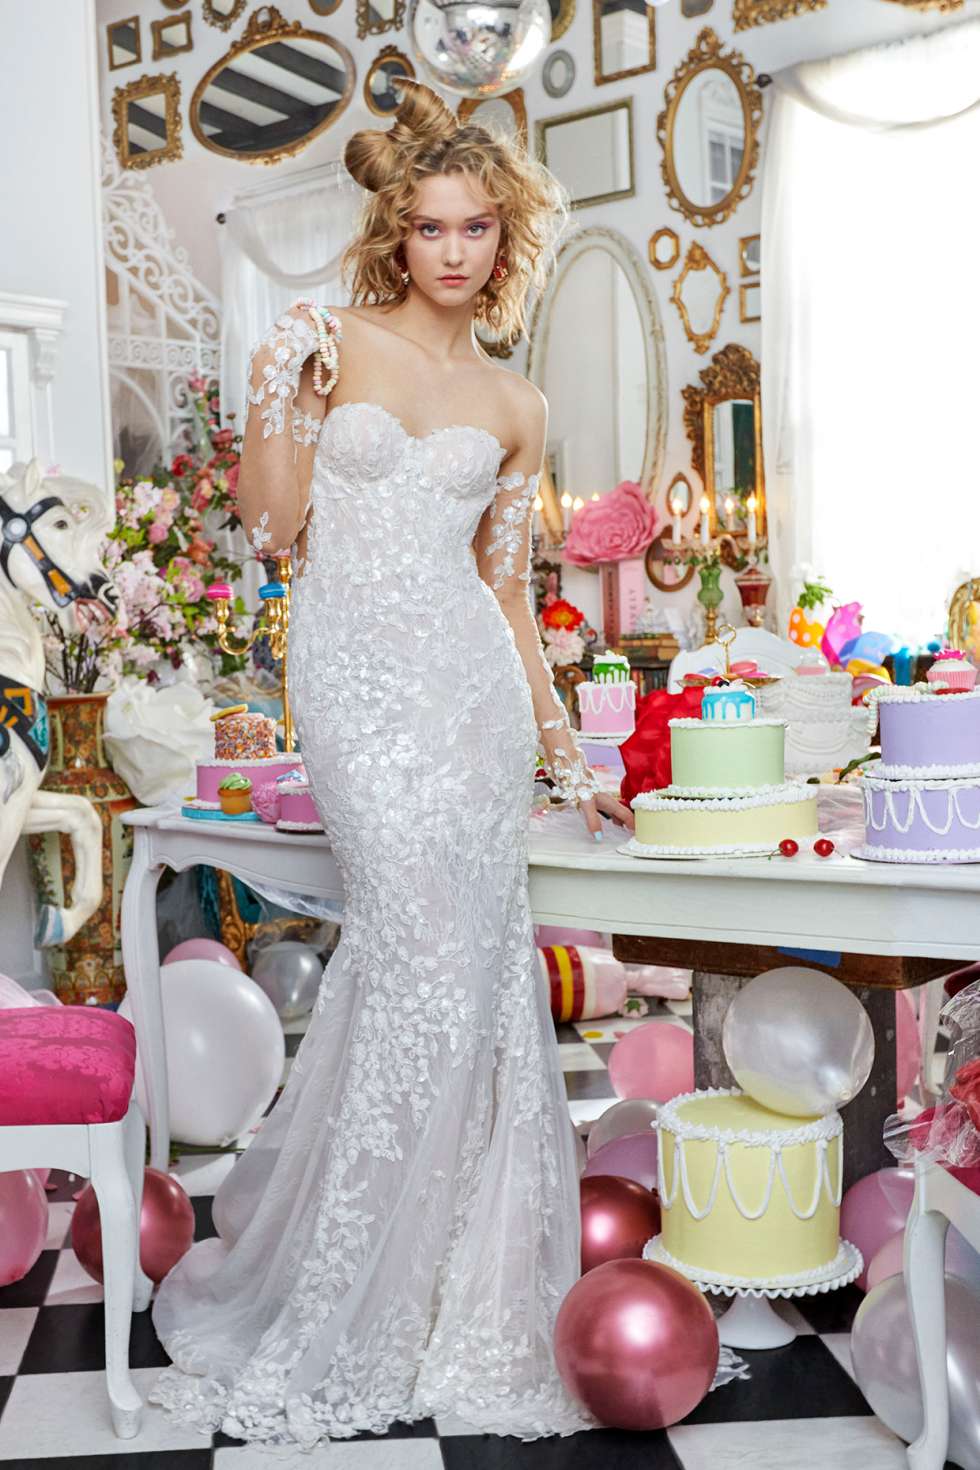 The Spring/Summer 2023 Wonderland Wedding Dress Collection by Ines Di Santo